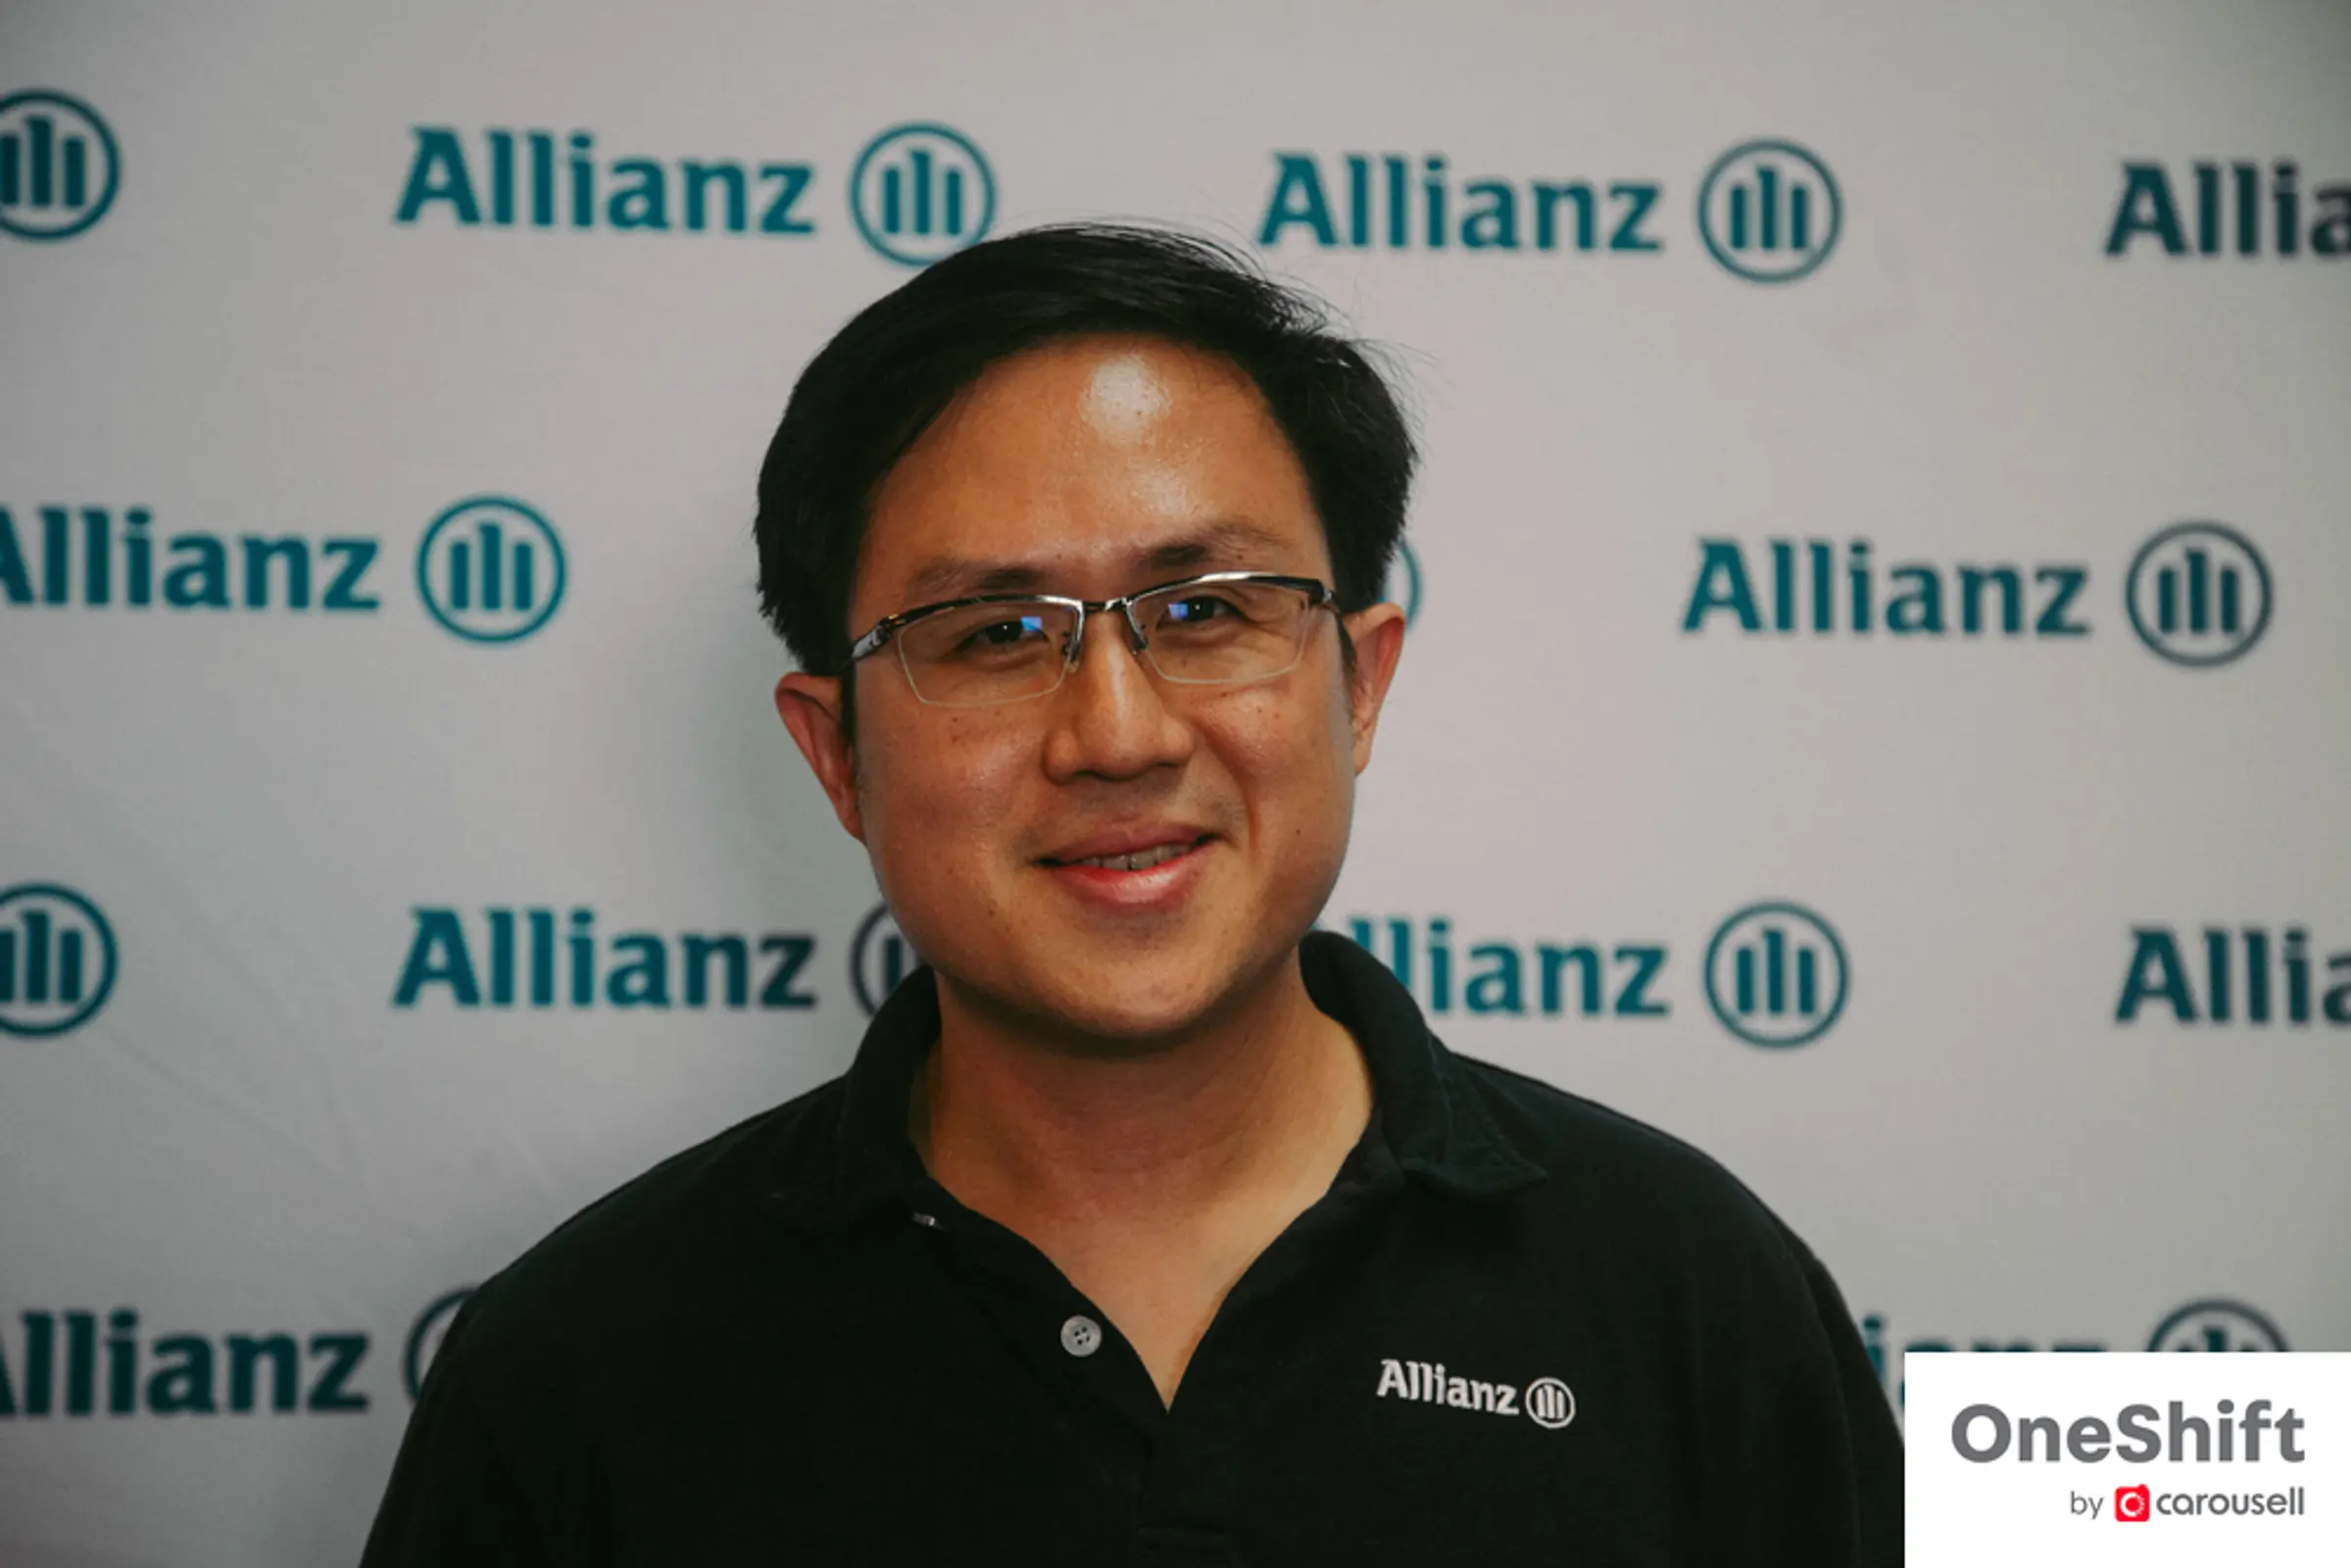 "Our goal is to help people along their electrification journey": Jing Yean Wong, Chief Technical Officer of Allianz Insurance Singapore